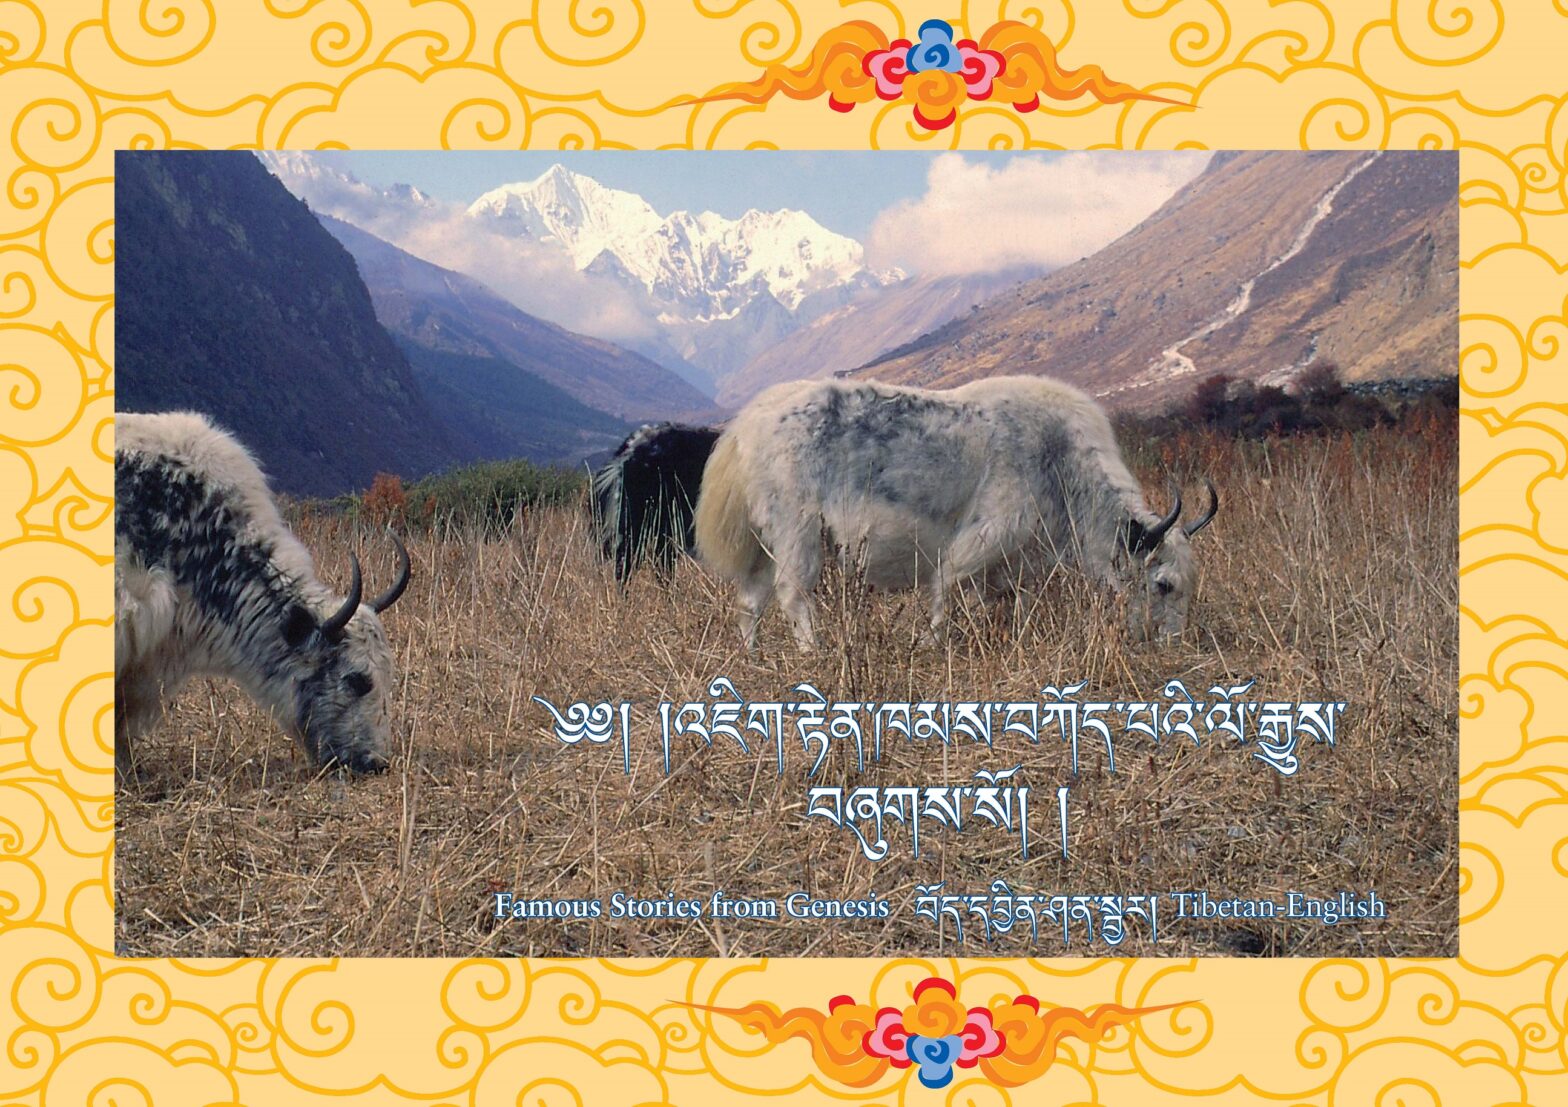 Famous Stories from Genesis (Tibetan and English)